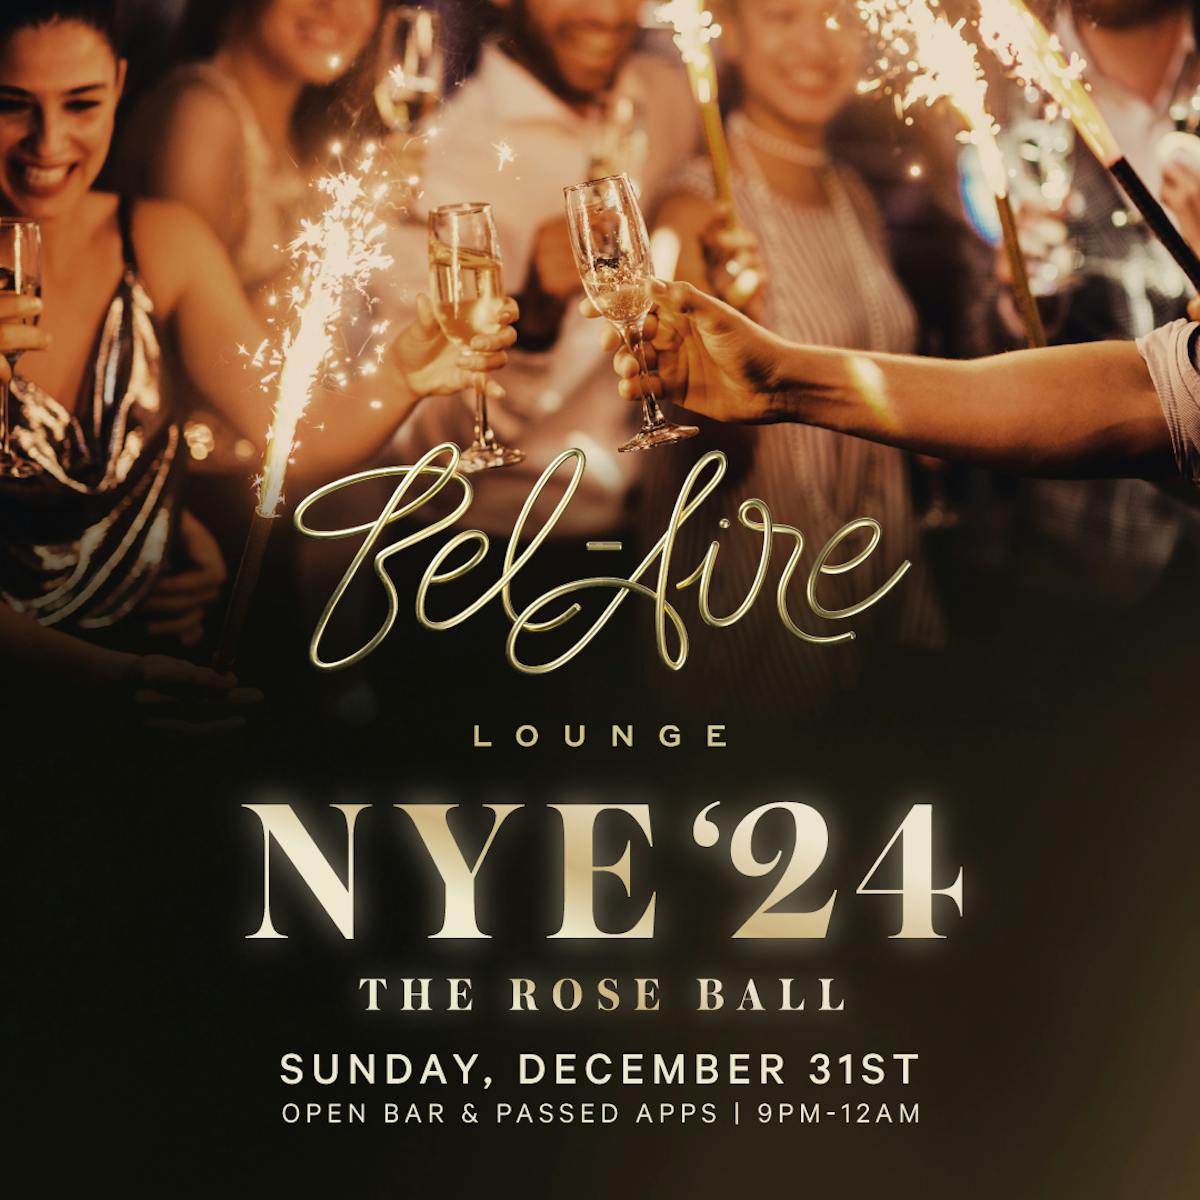 flyer for Bel-Aire Lounges' NYE event called The Rose Ball